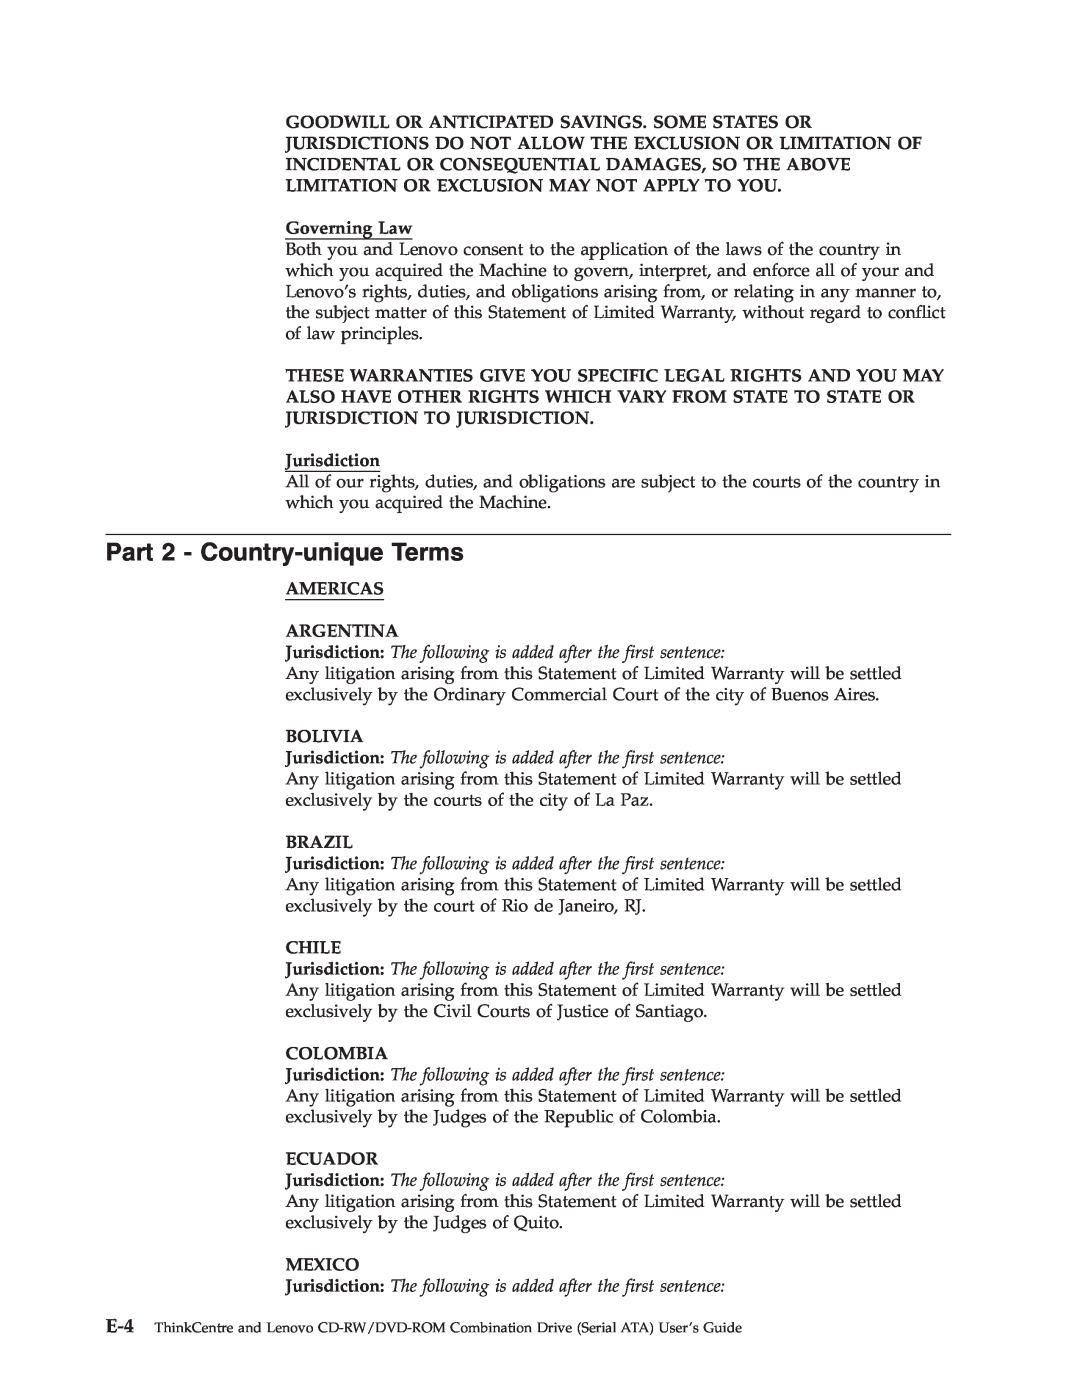 Lenovo 41N5624 manual Part 2 - Country-uniqueTerms, Governing Law, Jurisdiction, Americas Argentina, Bolivia, Brazil, Chile 